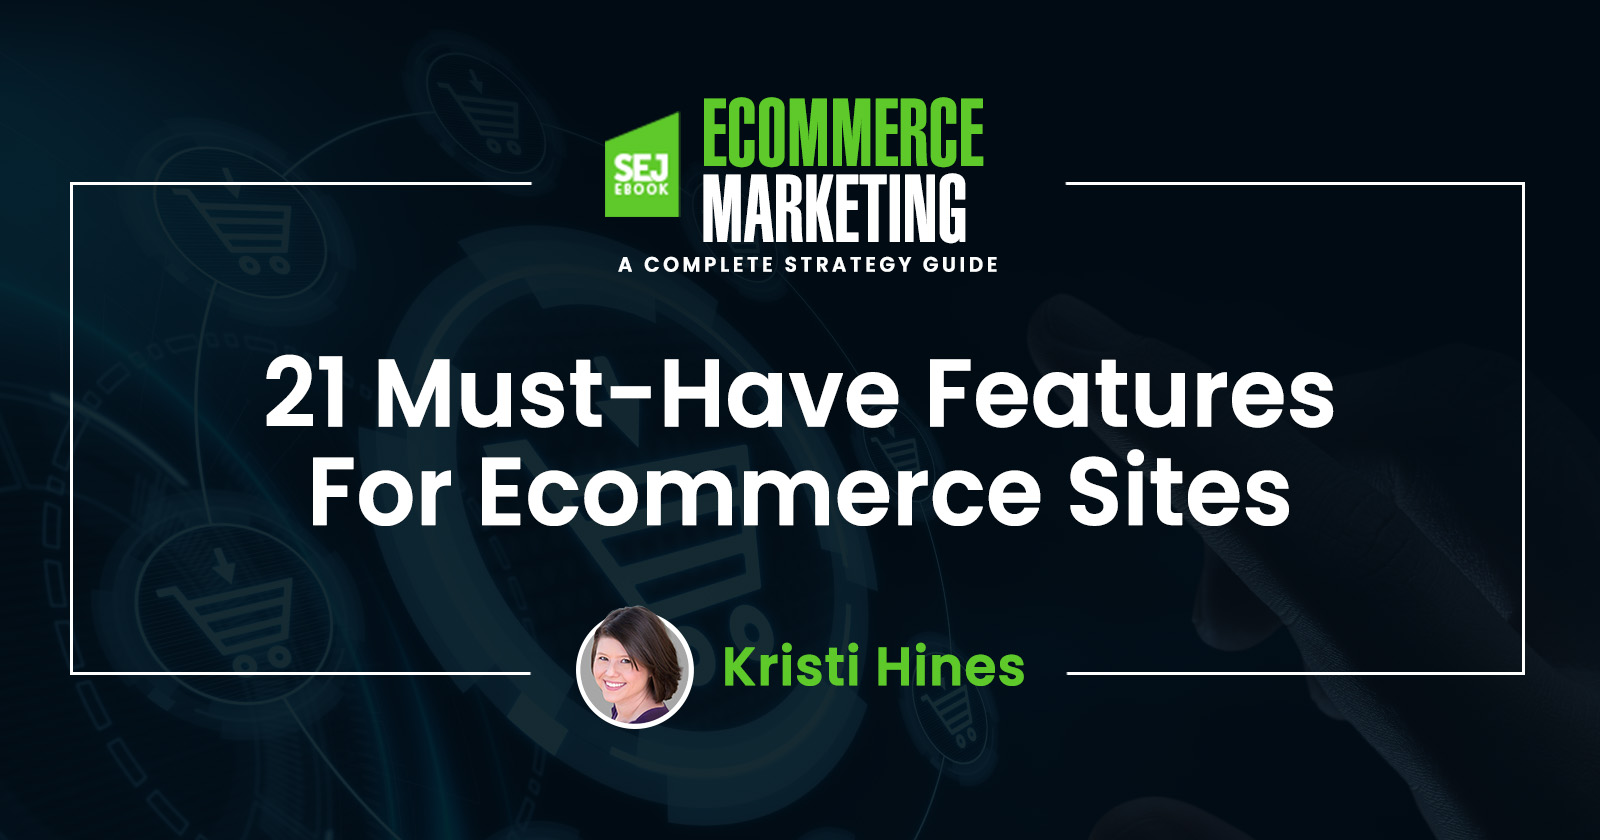 https://www.searchenginejournal.com/wp-content/uploads/2021/06/21-must-have-features-for-ecommerce-sites-628b09c8cc322-sej.jpg